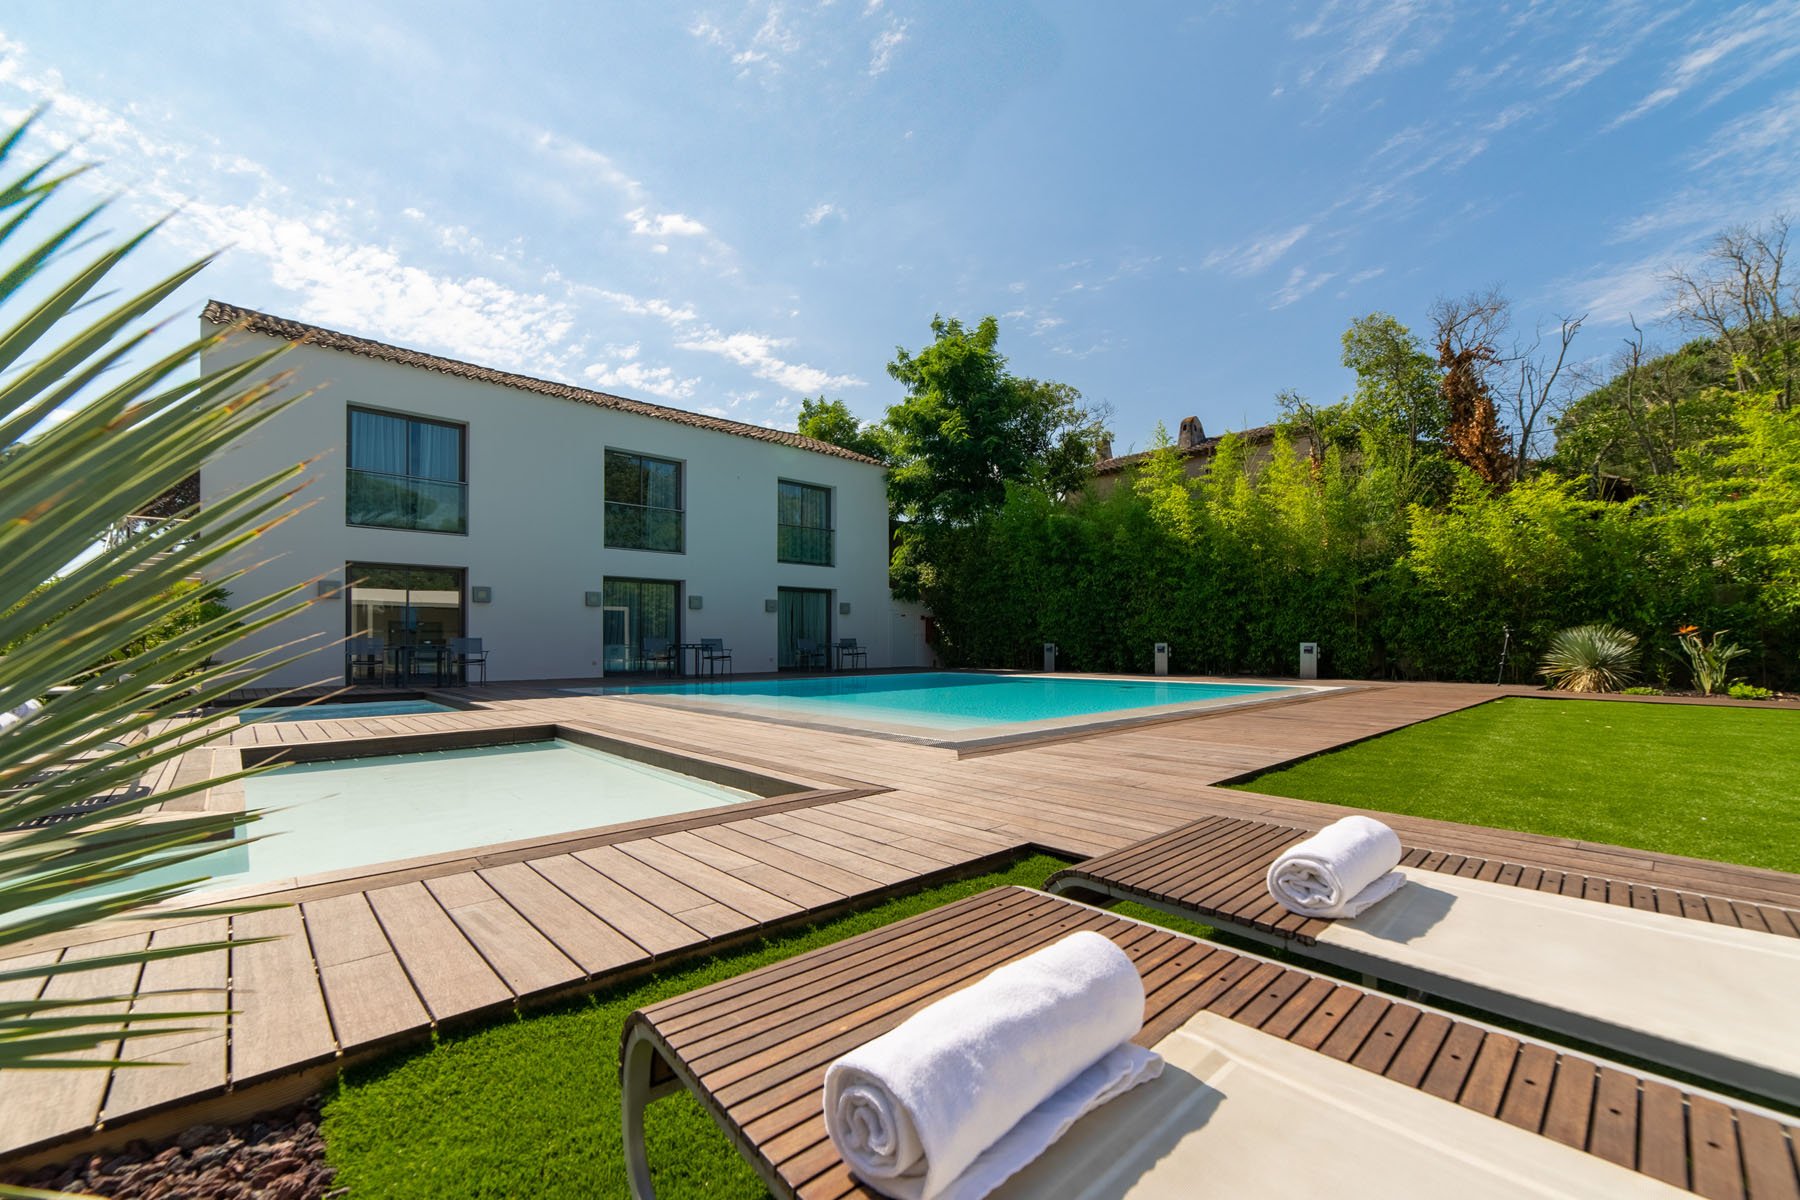 Outdoor Pool  - Kube Hotel Saint-Tropez - South of France